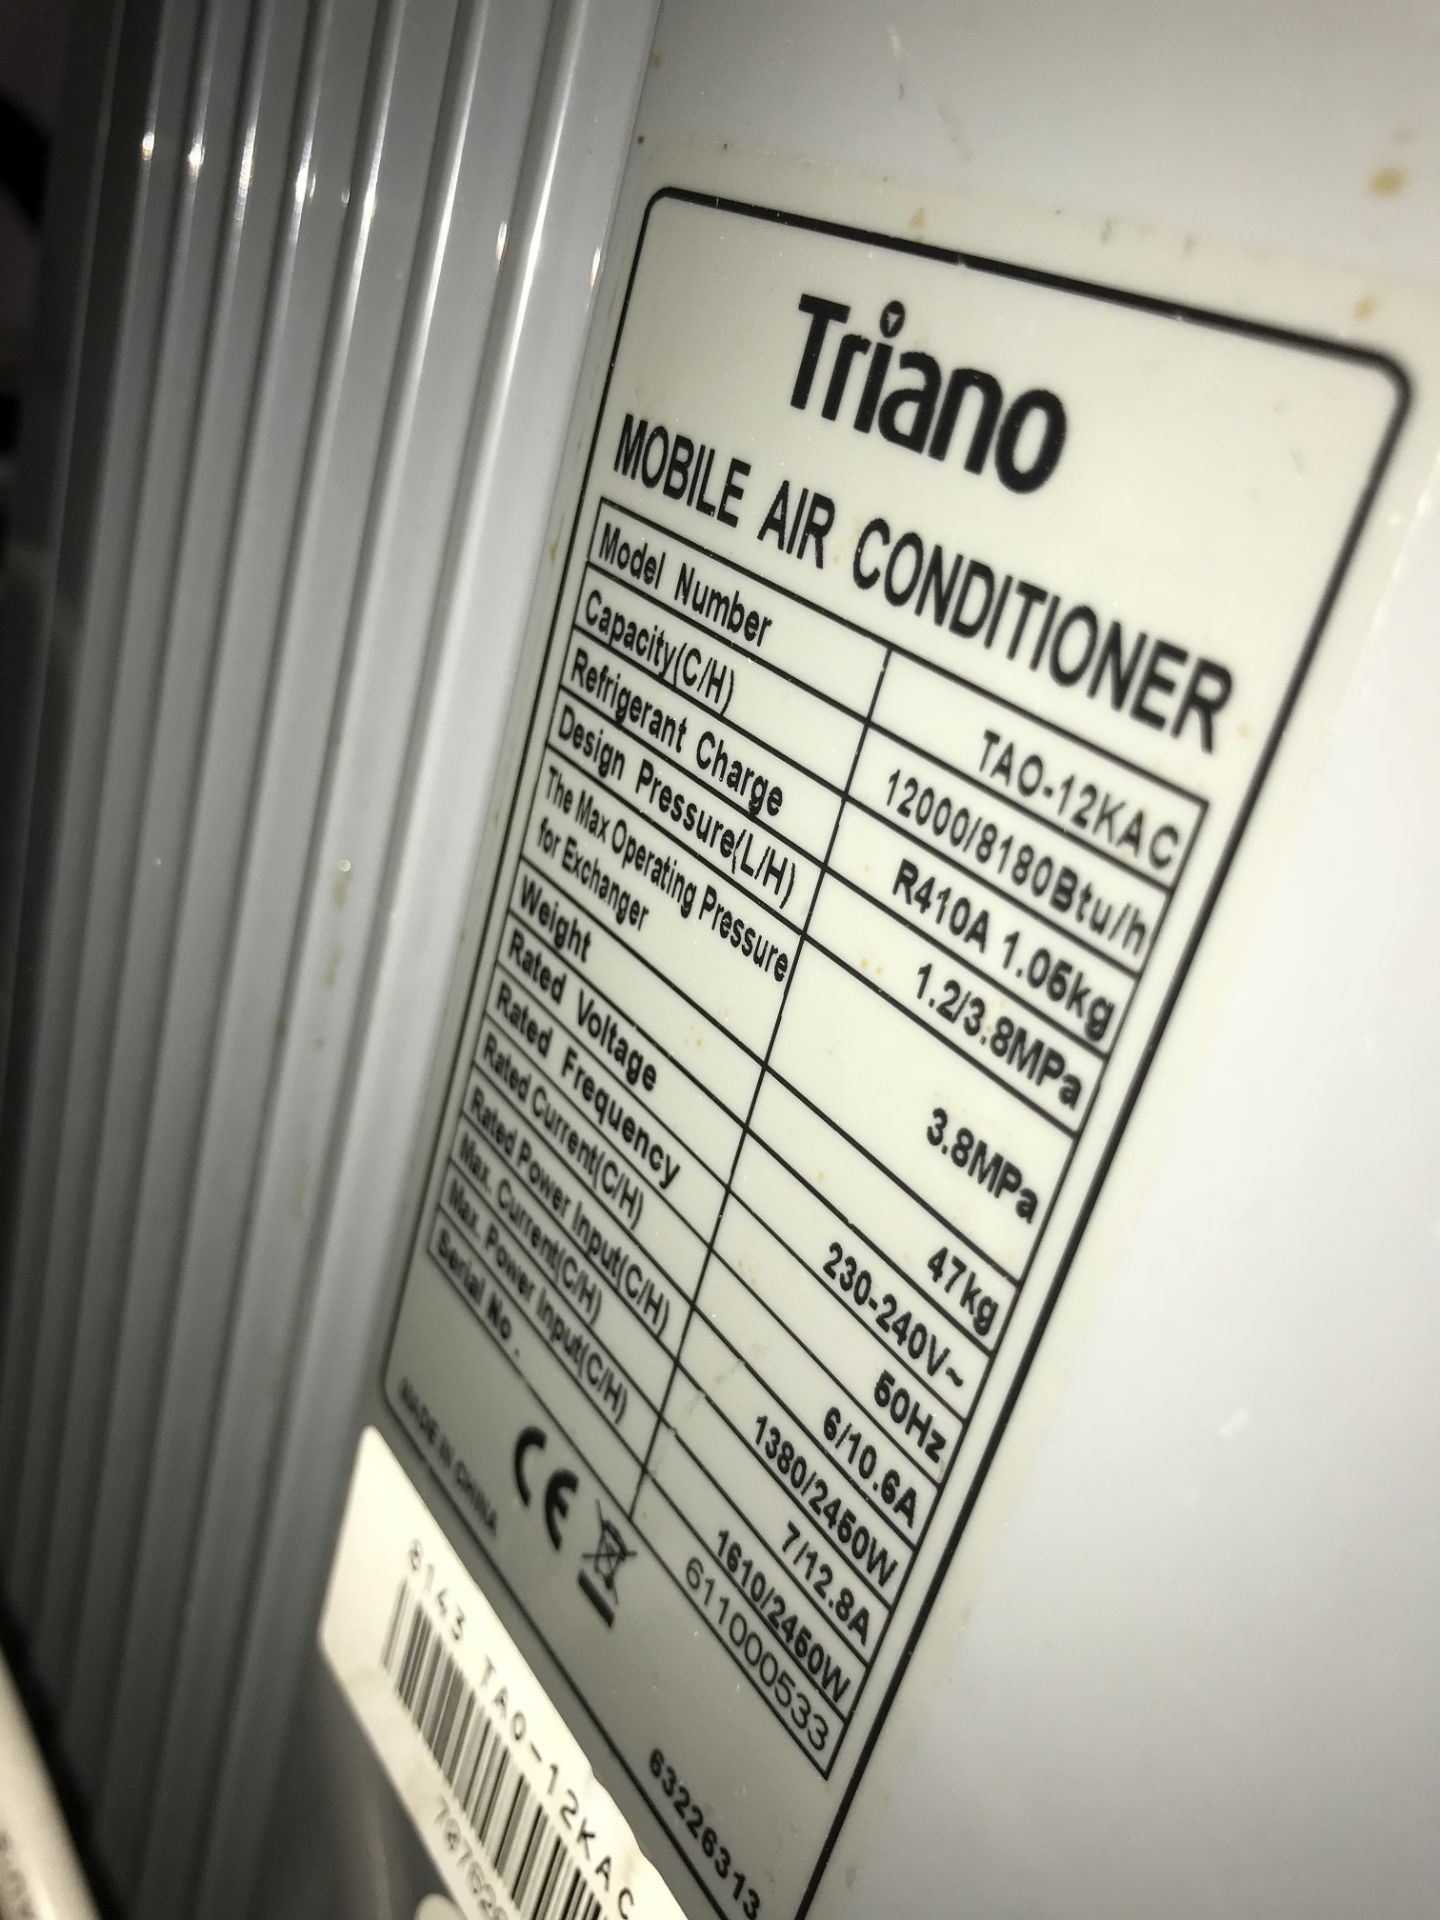 Triano Mobile Air Conditioning Unit - Image 3 of 3